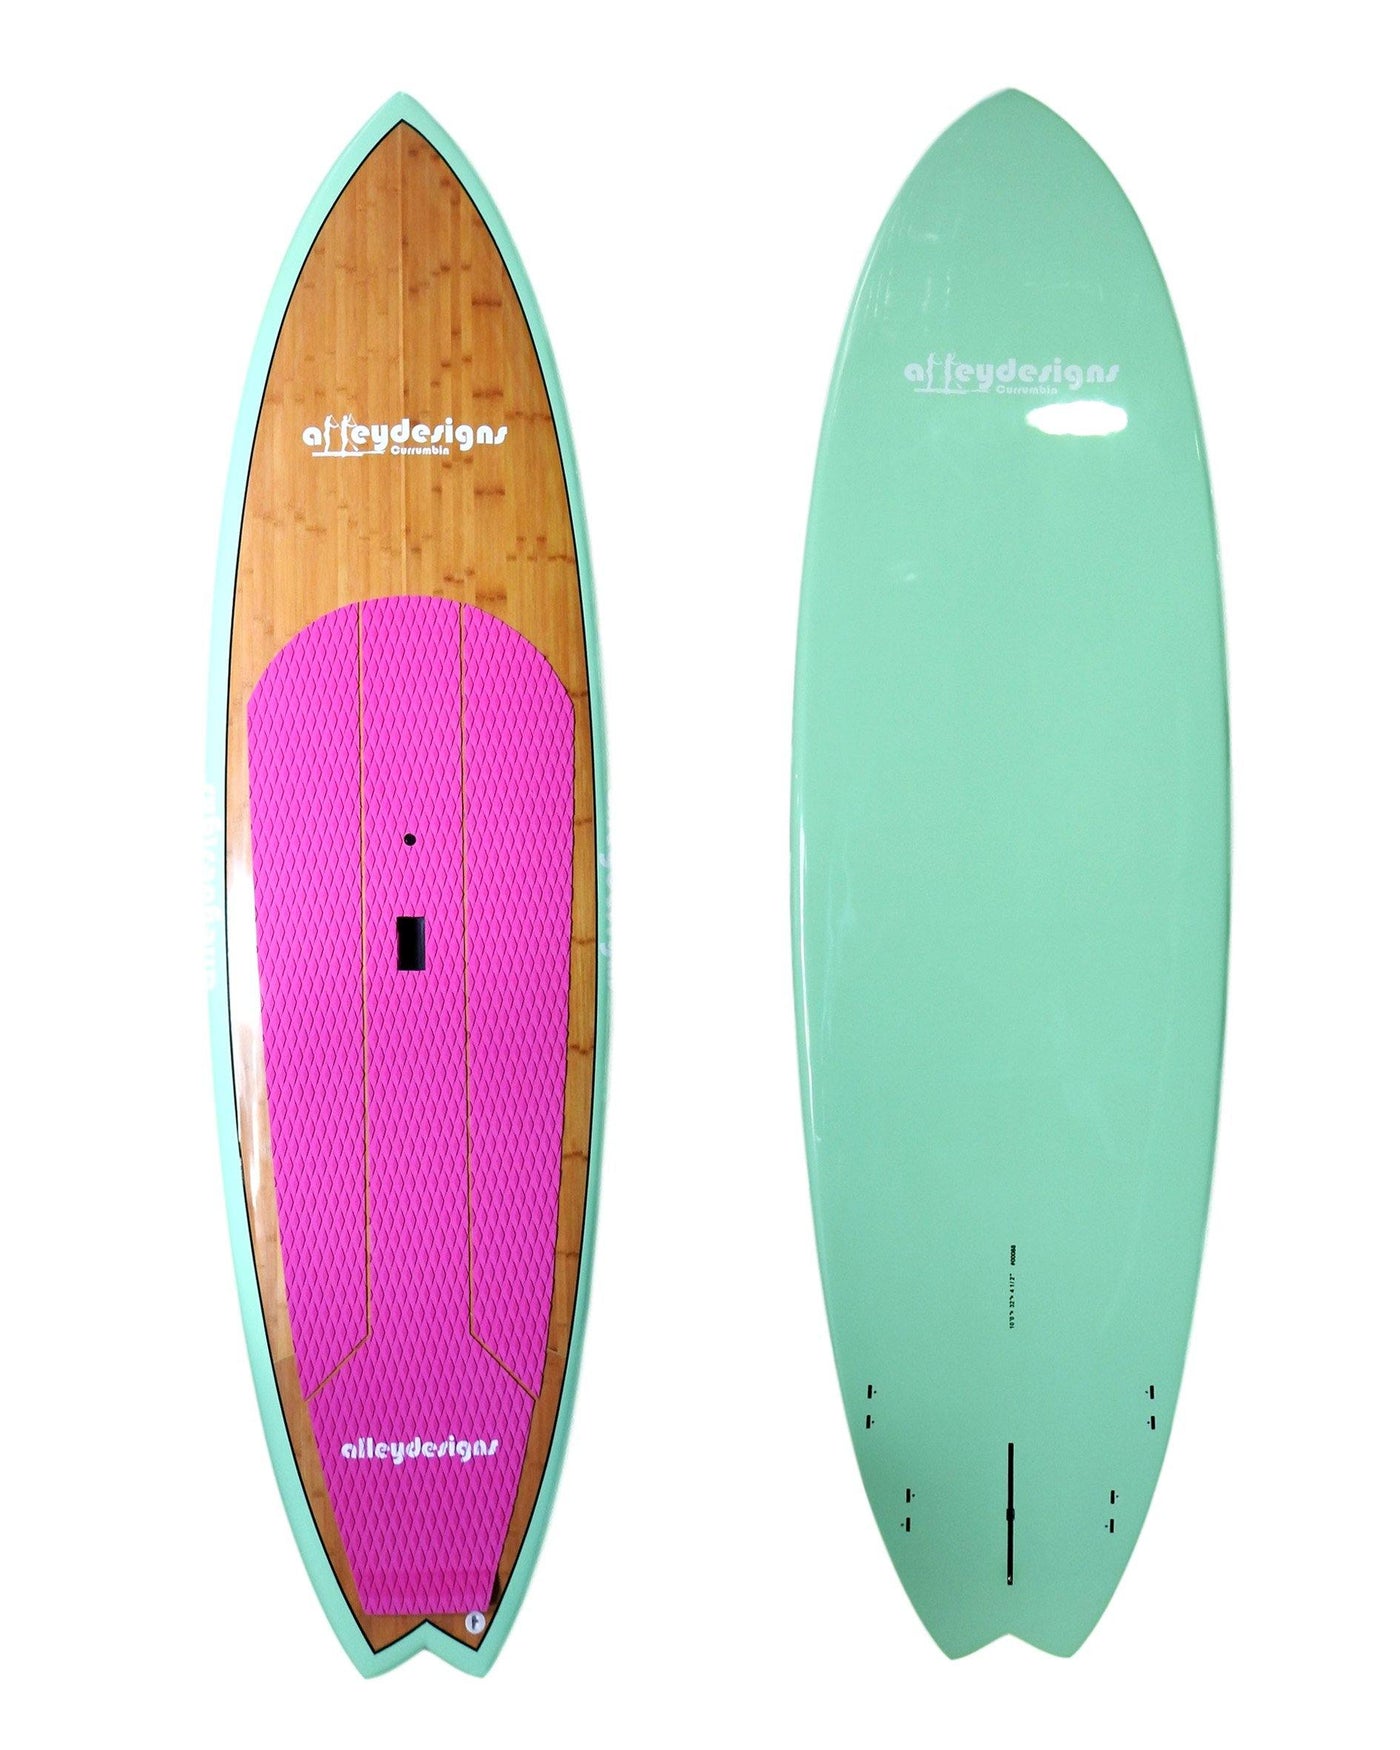 10' x 32" Bamboo Performance Mint & Pink Alleydesigns SUP 9KG - Alleydesigns  Pty Ltd                                             ABN: 44165571264